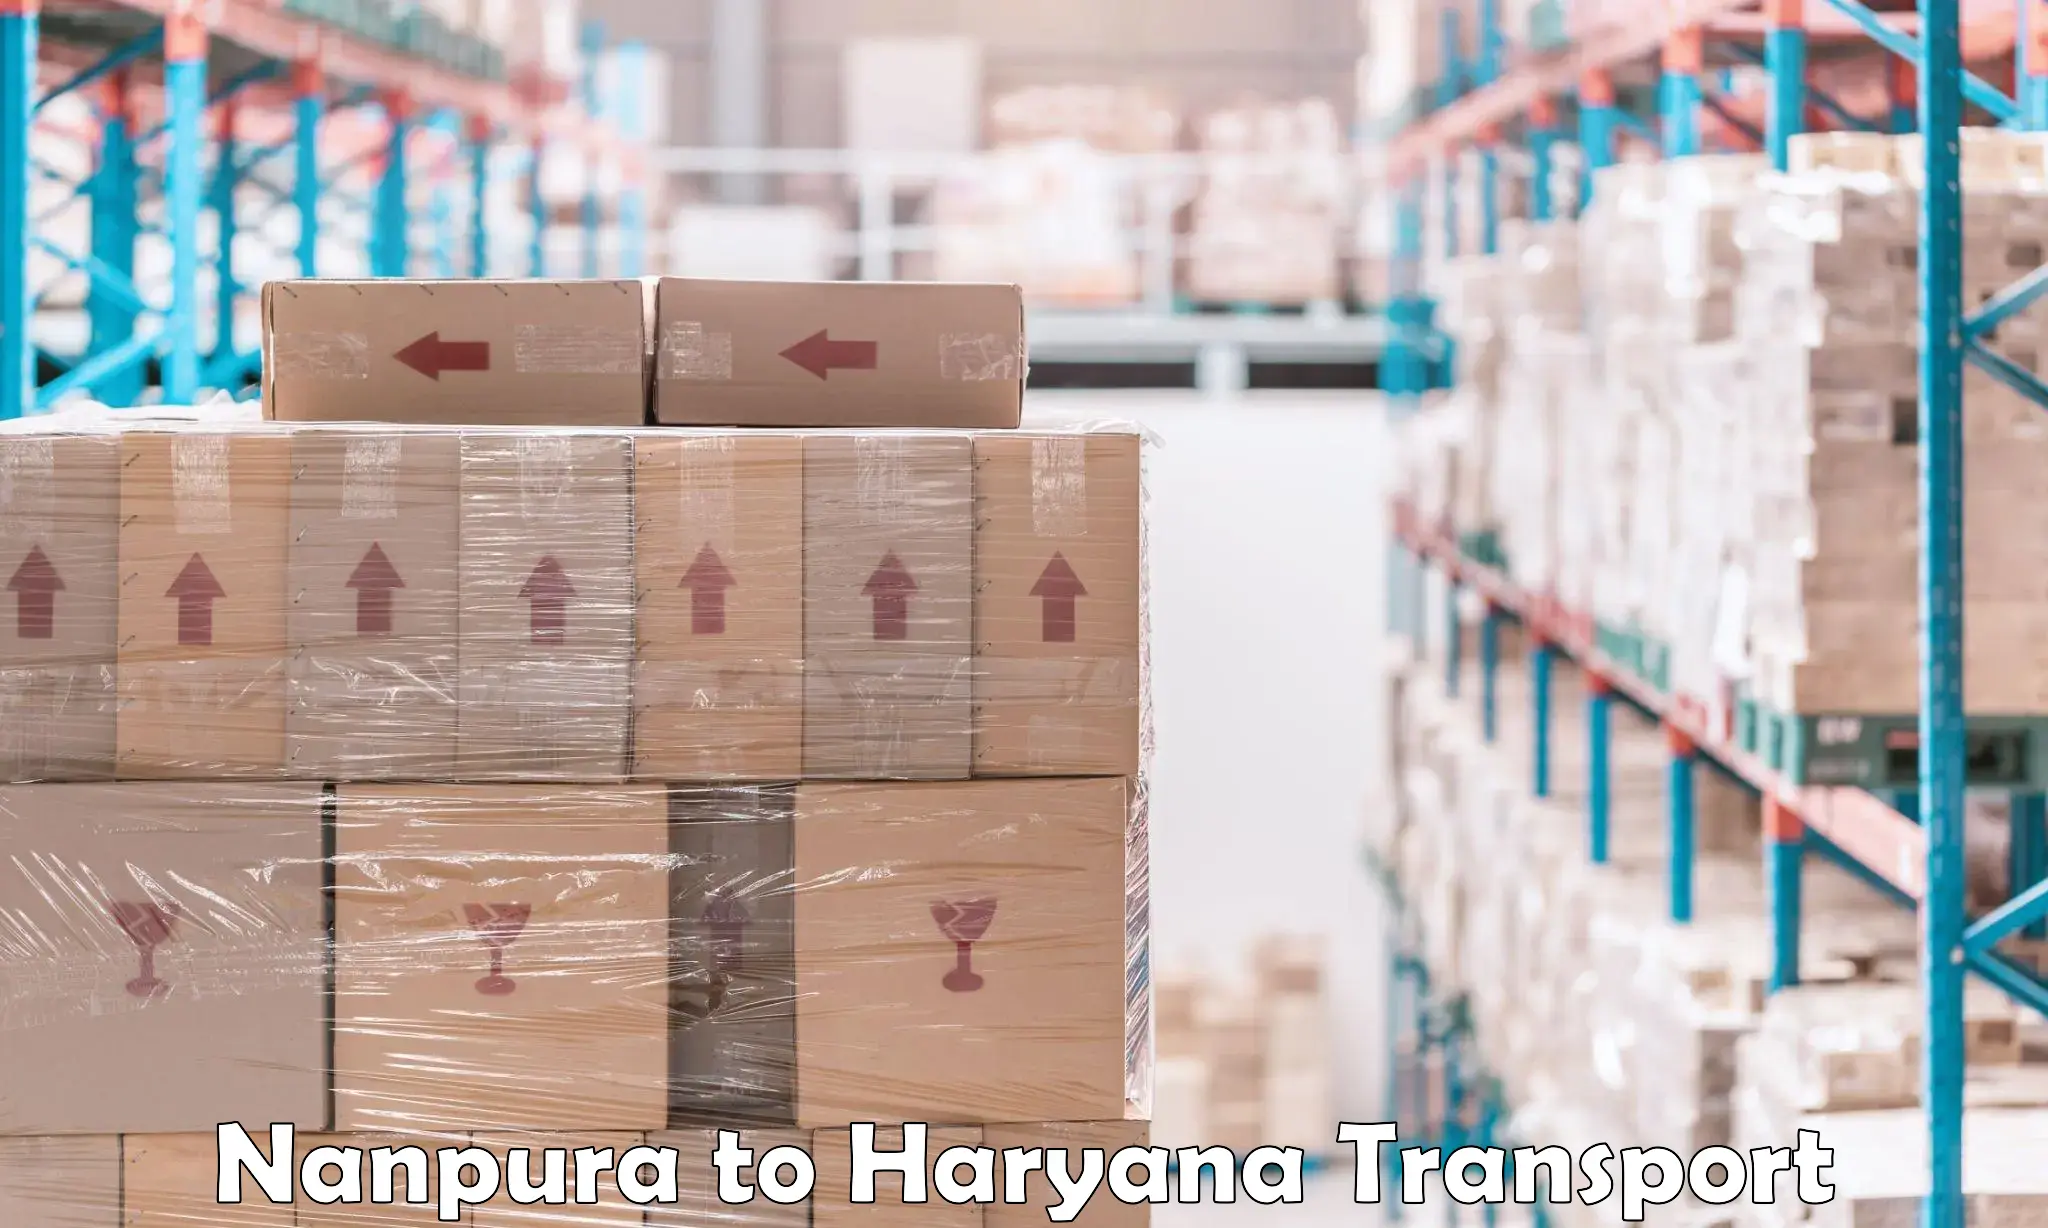 Container transport service Nanpura to Odhan